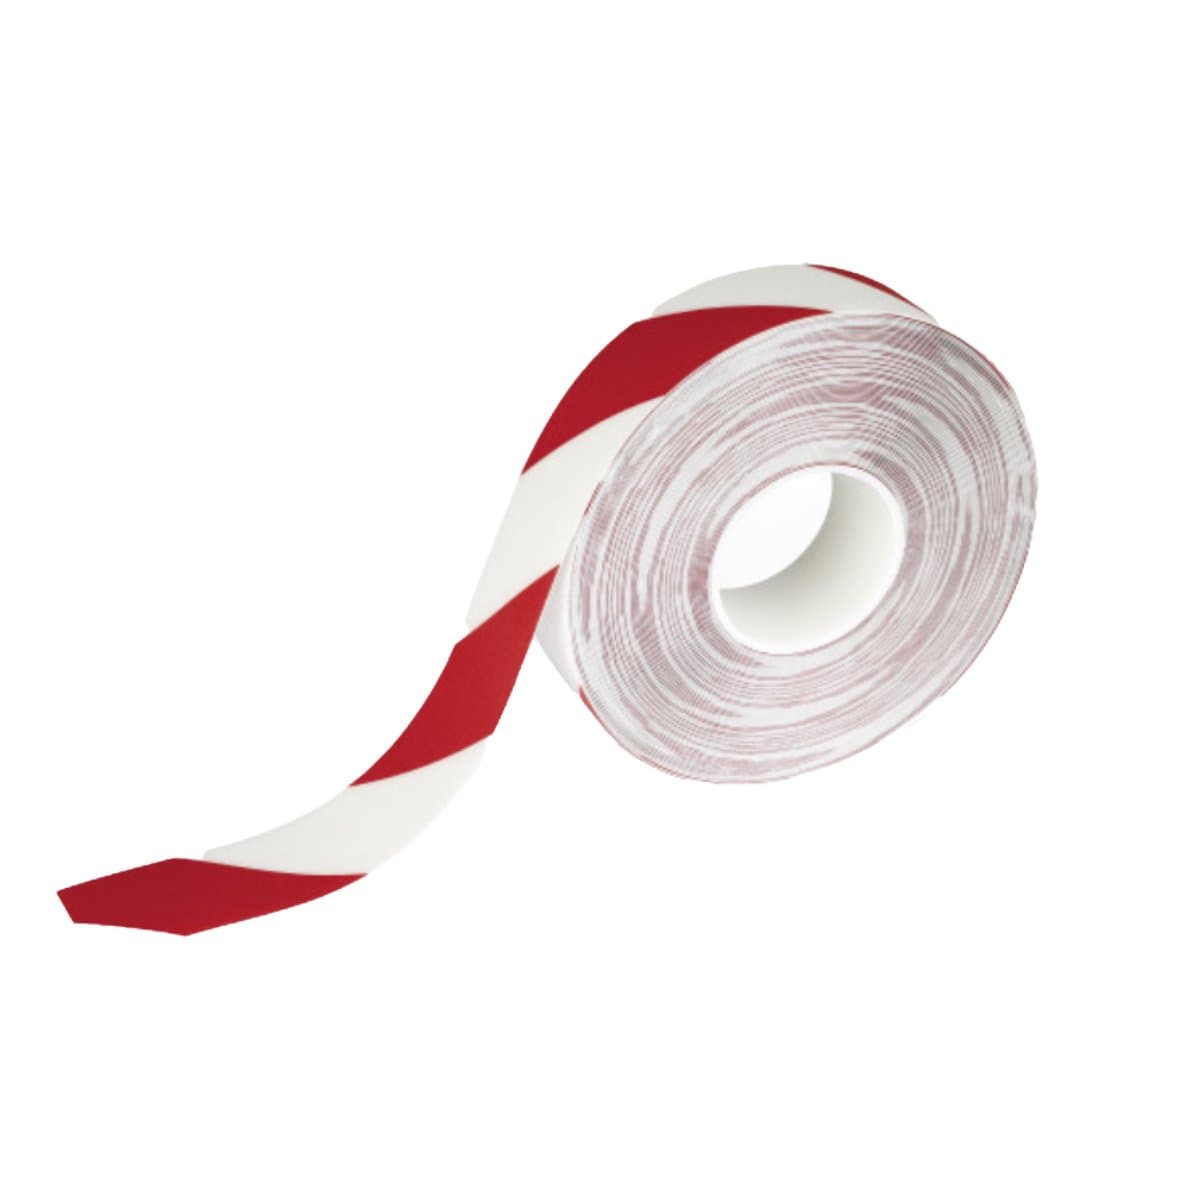 Durable DURALINE strong self-adhesive permanent signal marking Tape, 50mm x 30m, Red/White